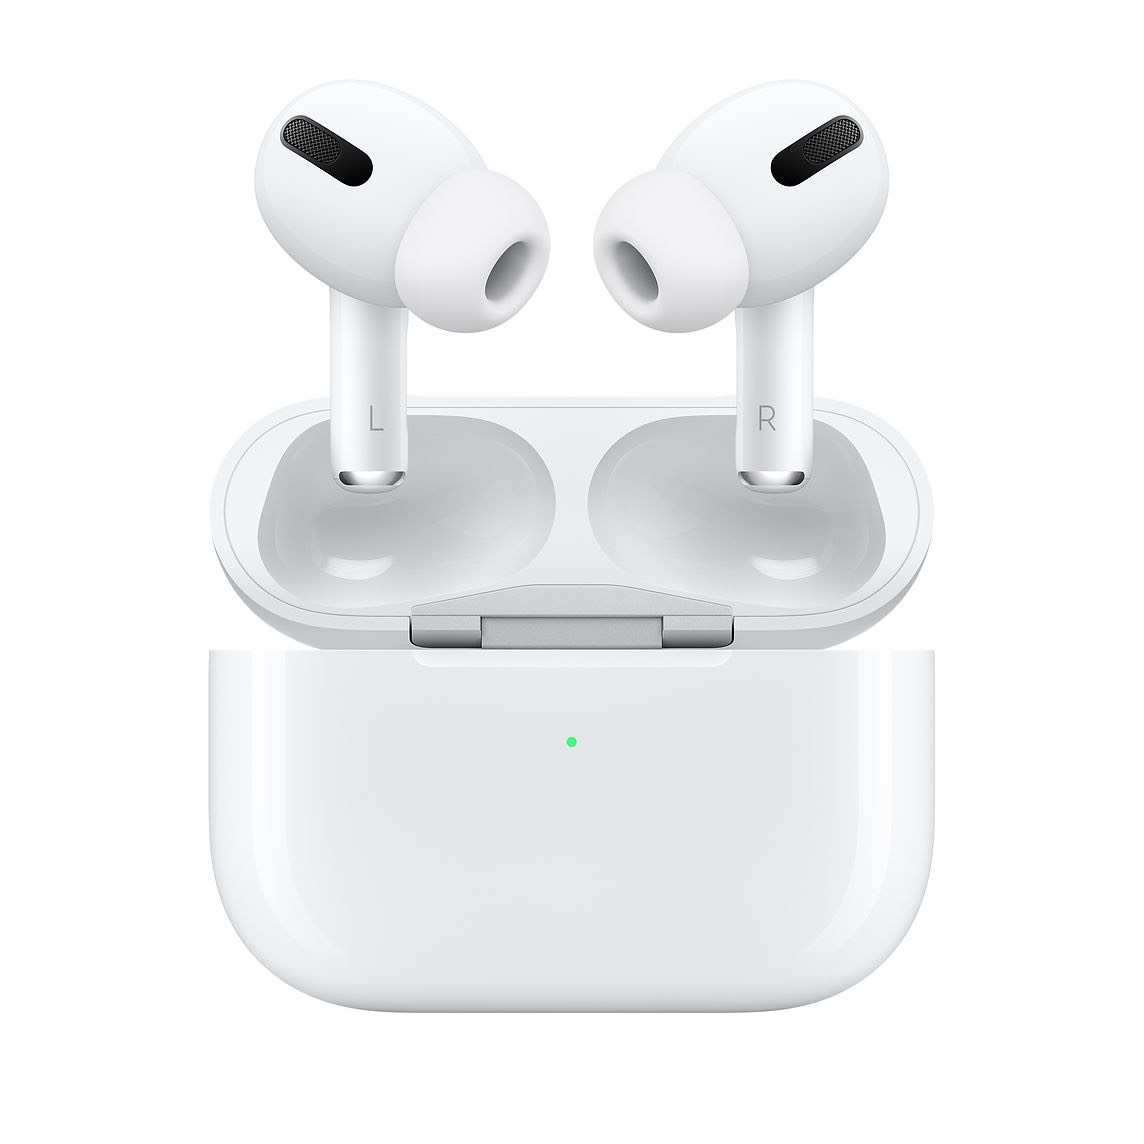 APPLE AirPods Pro - White £199.99 price match at Currys PC World